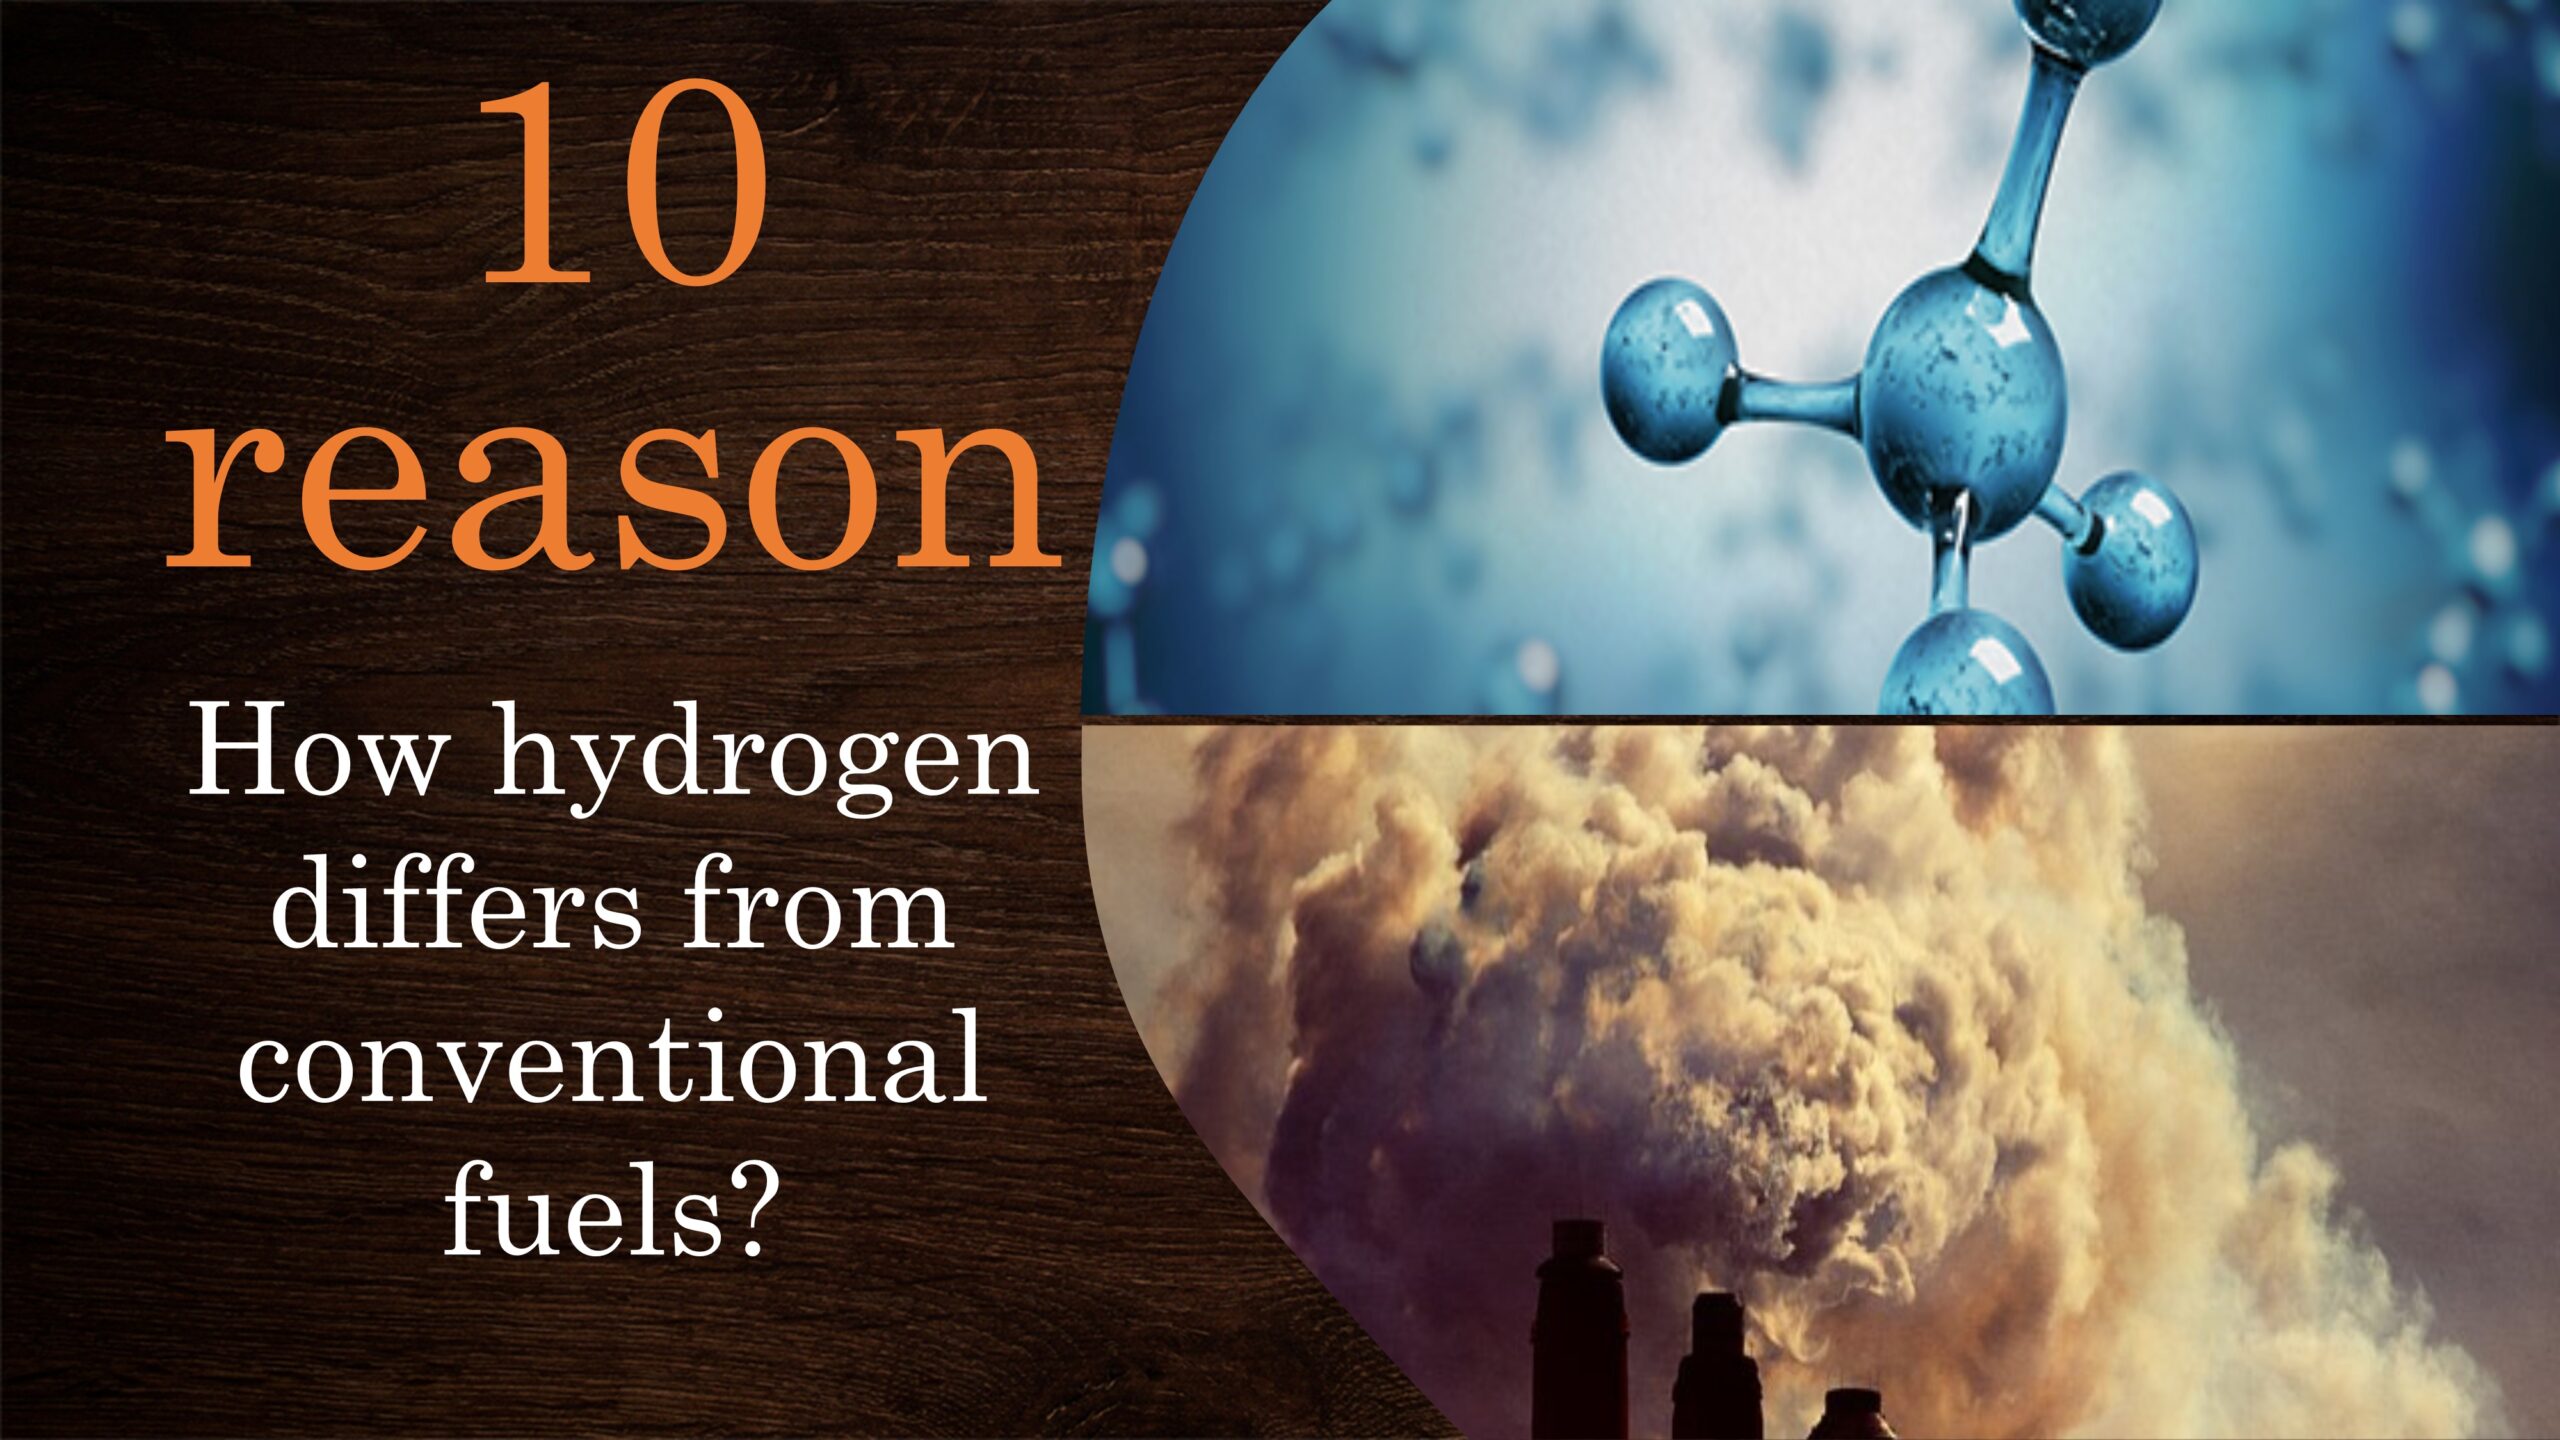 Hydrogen differs from conventional fuels